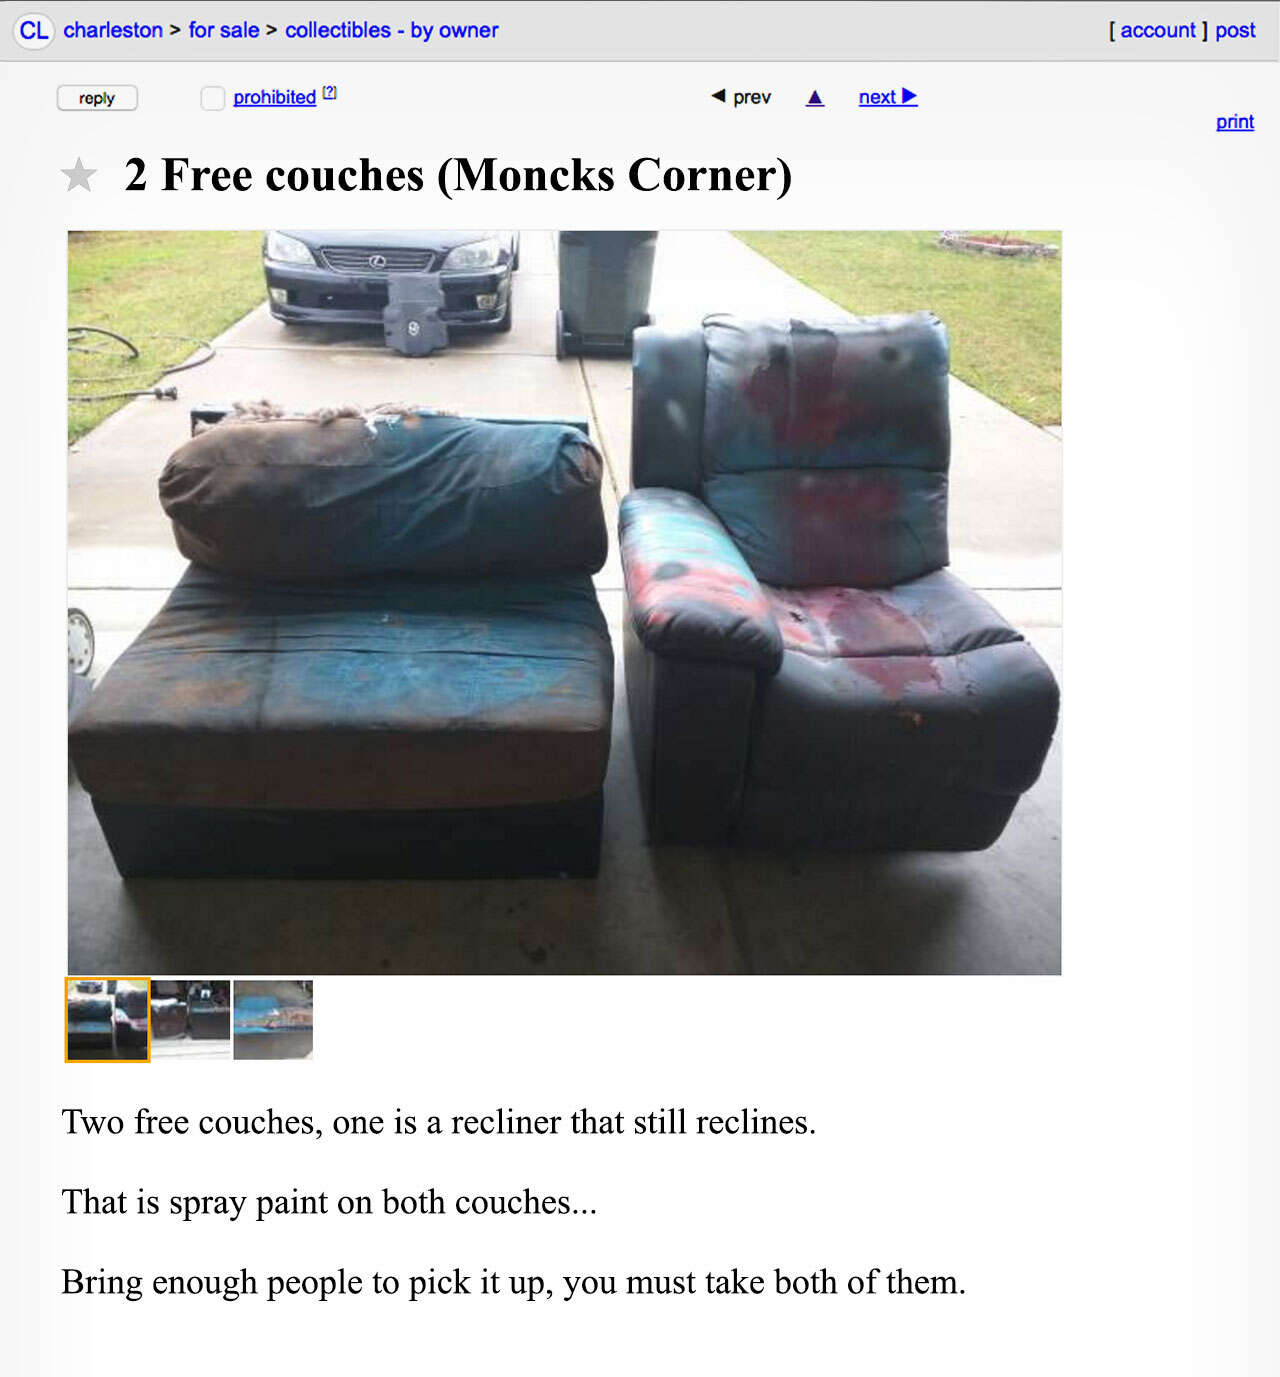 A Craigslist advertisement for two disgusting couches. 